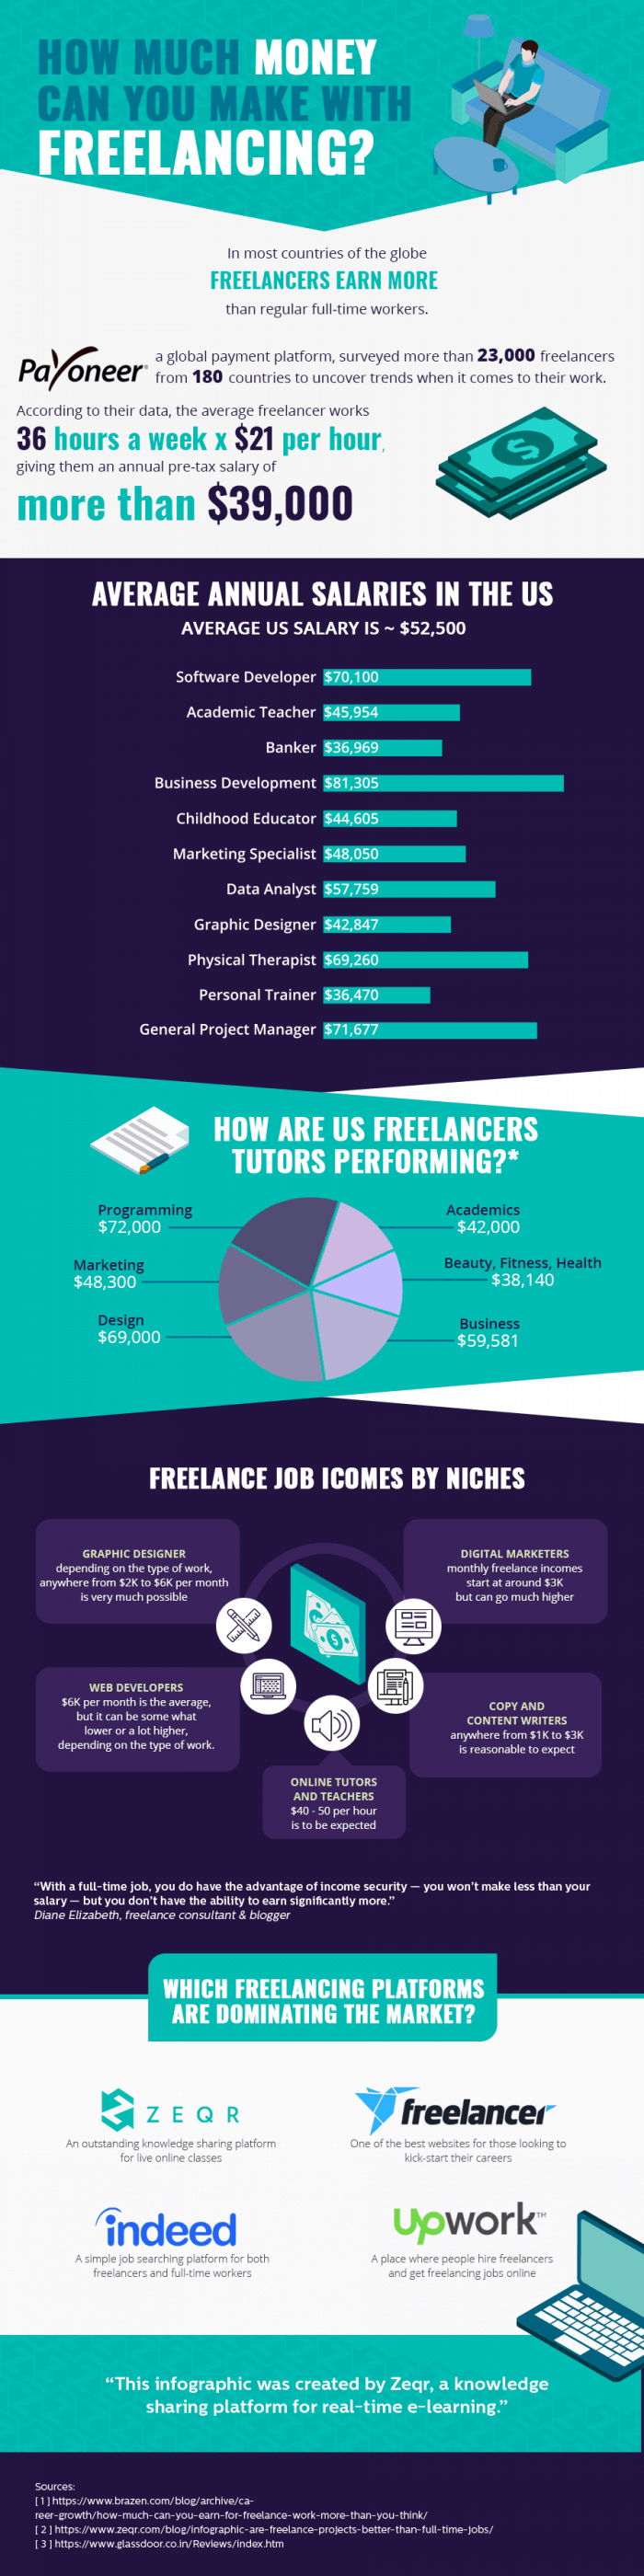 how much can you do freelancing infographic